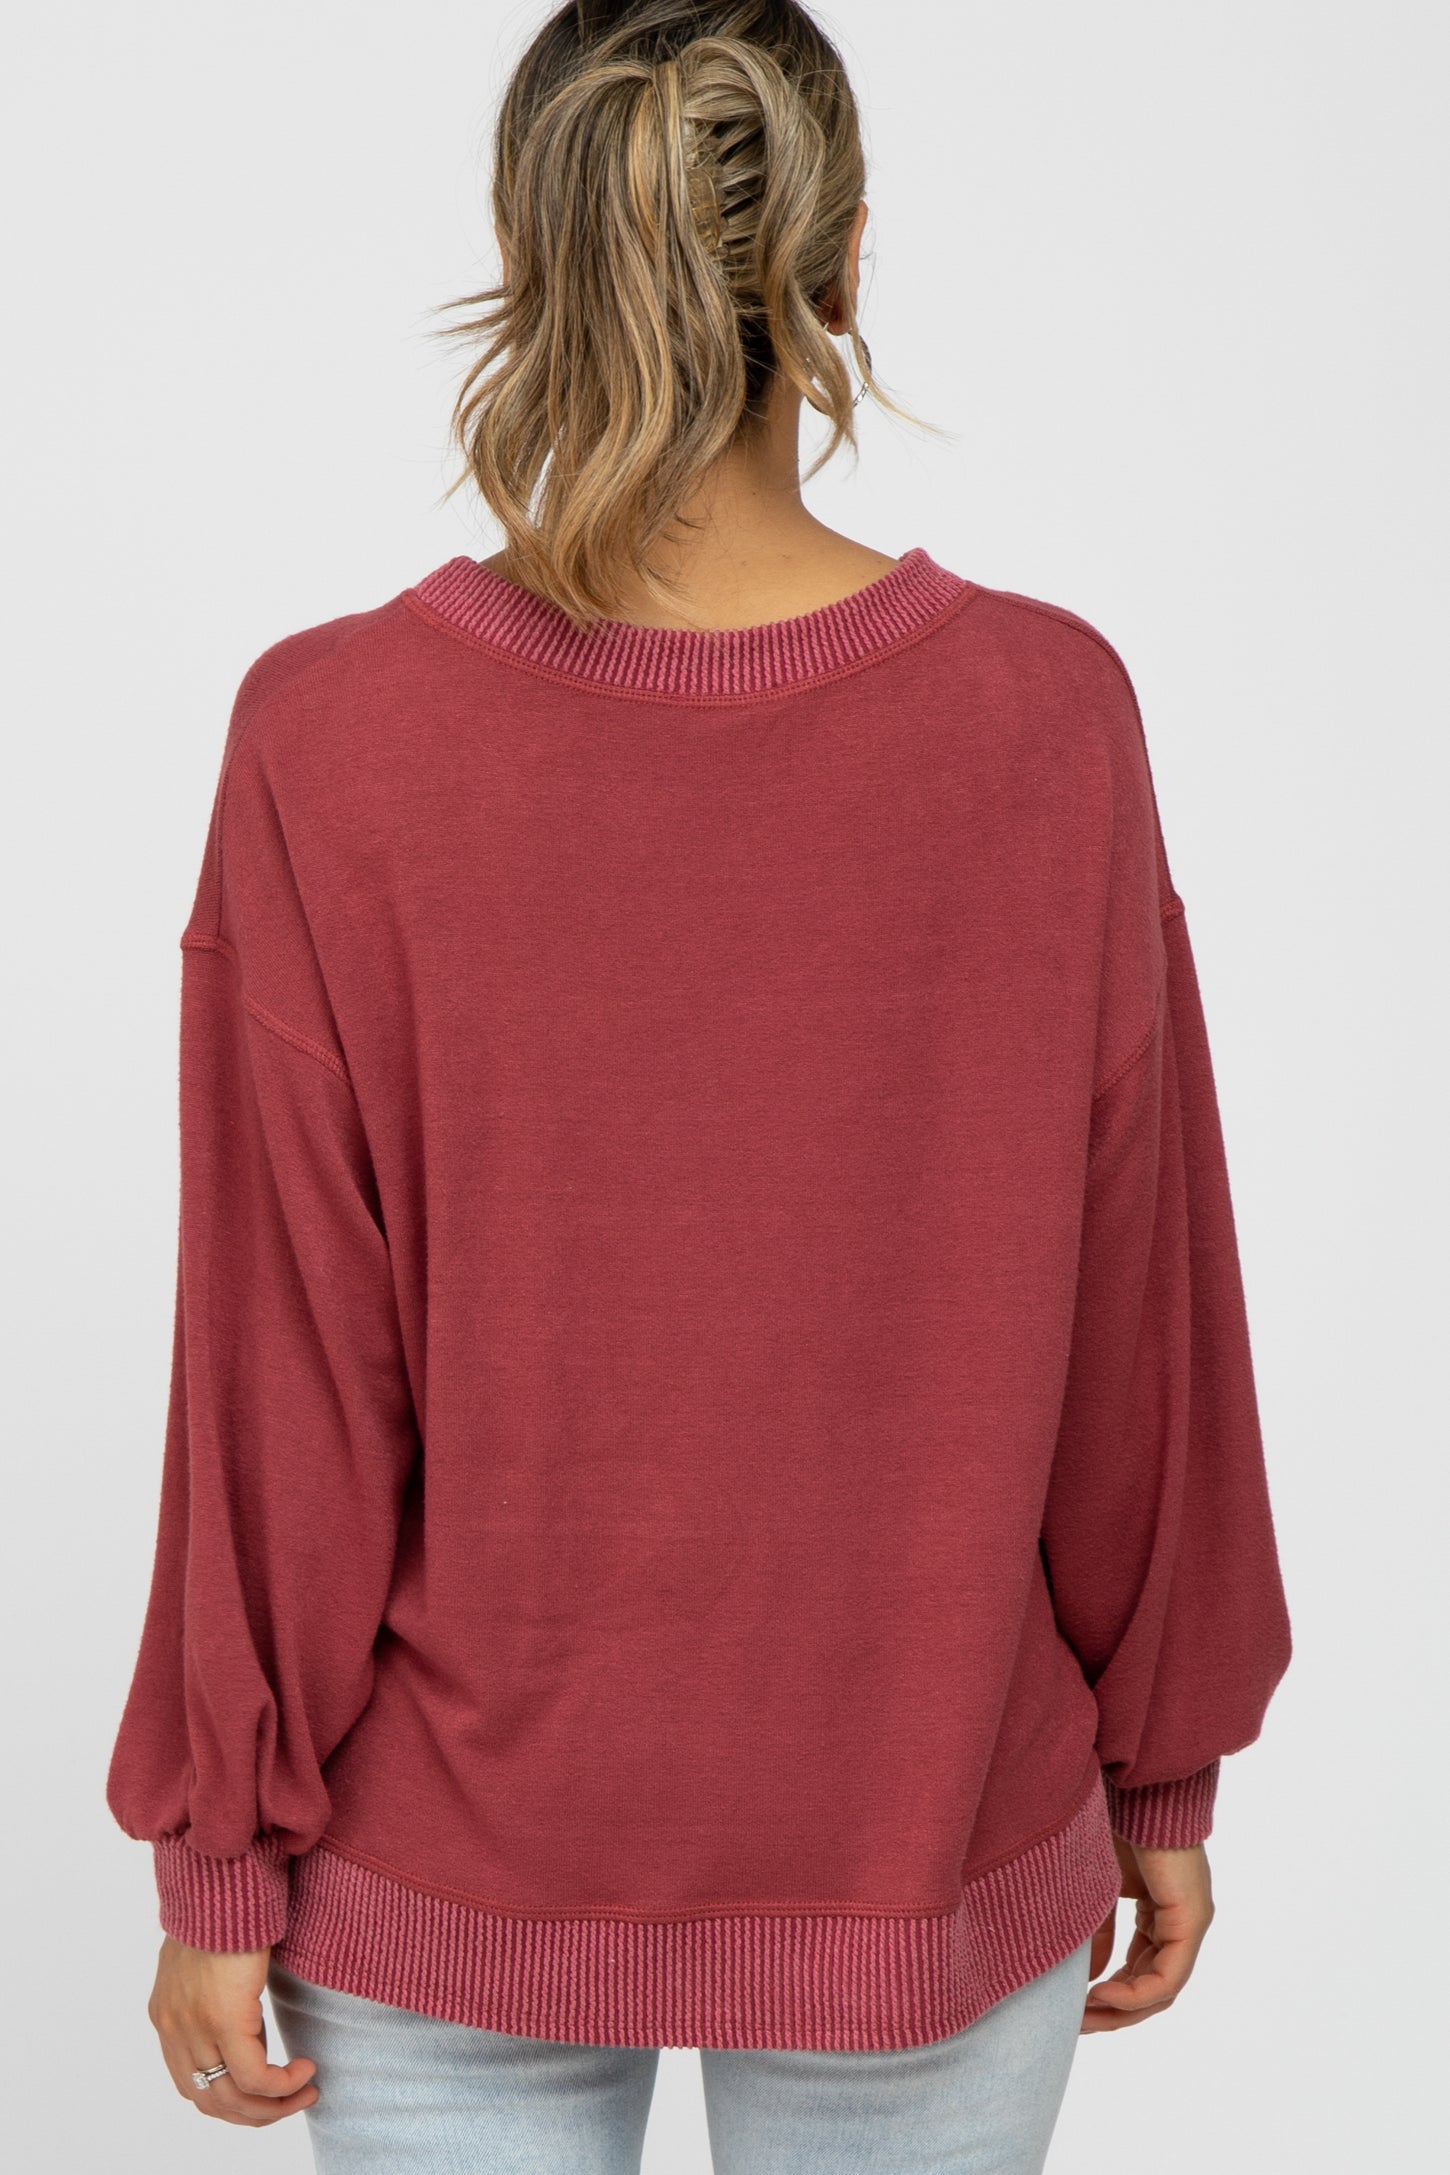 Red Long Sleeve Ribbed Accent Top